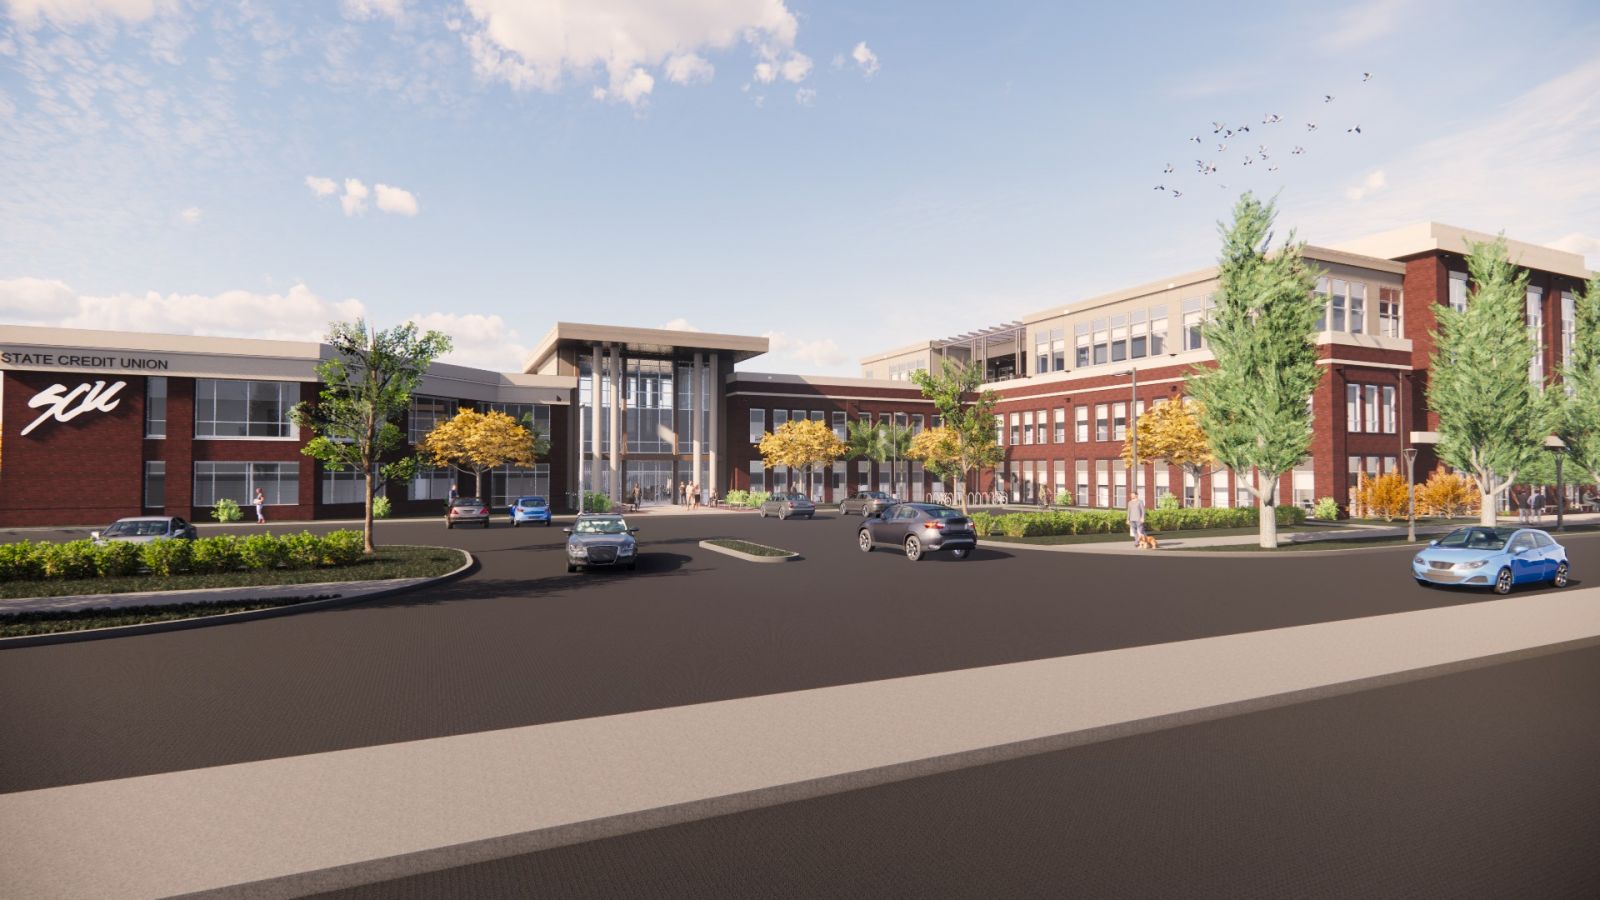 State Credit Union held a groundbreaking ceremony for its new 50,000-square-foot location at 800 Huger St. in downtown Columbia on Tuesday. (Rendering/Provided)